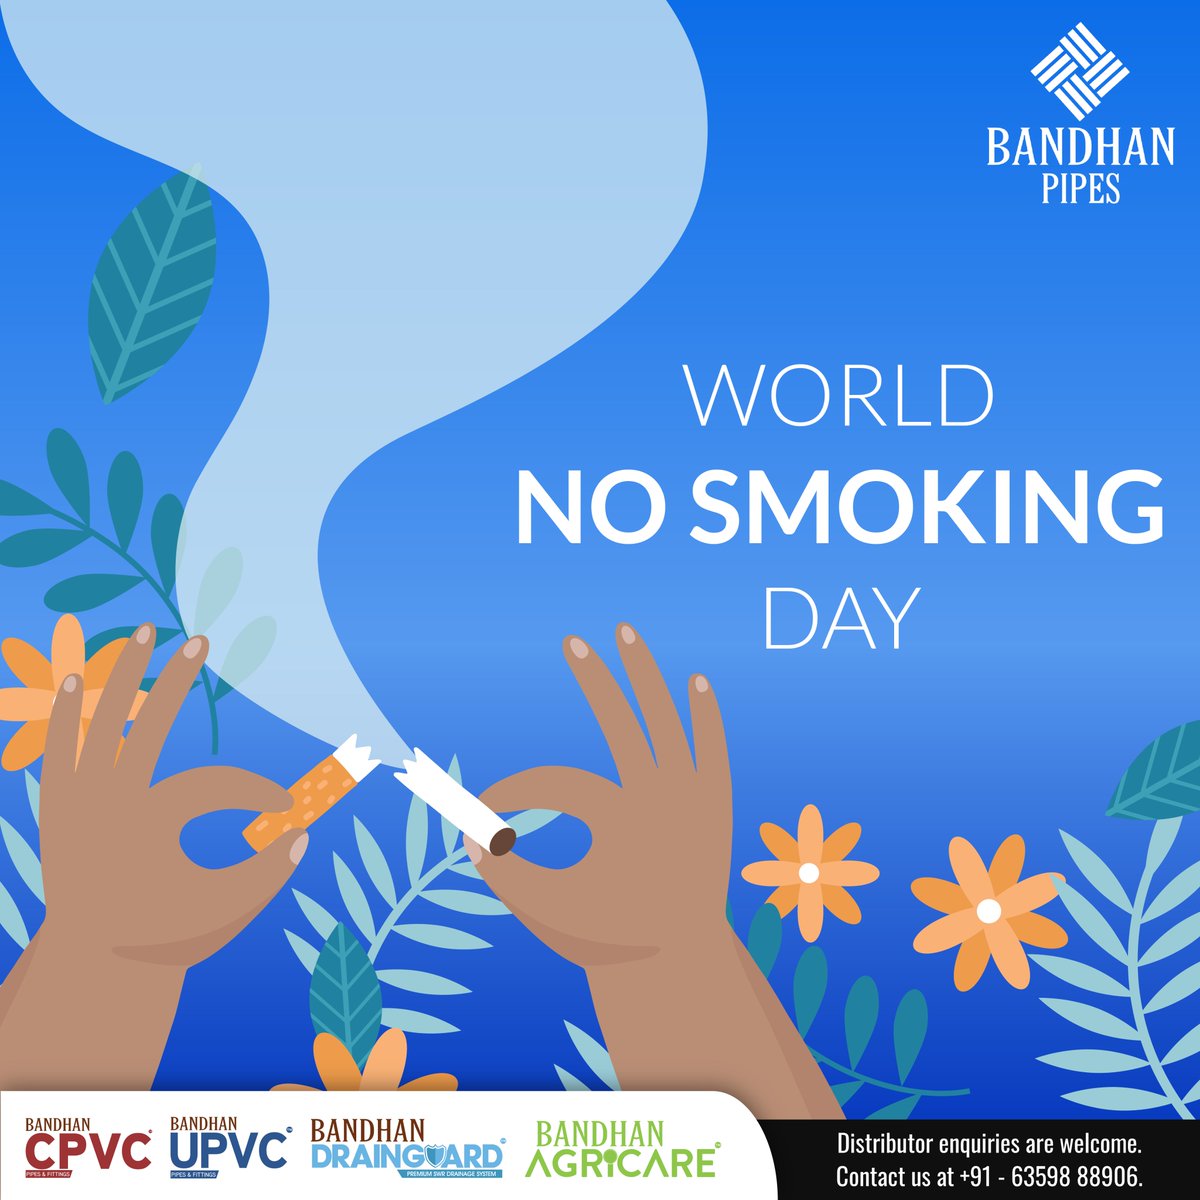 Join the movement towards a smoke-free world this World No Smoking Day. Your health is your greatest wealth – let's clear the air together! 🚭 . . #WorldNoSmokingDay #BreatheFree #bandhanpipes #drainguard #SochoBandhanPipes #pipes #plumbing #pvc #pvcpipes #industry #cpvc #upvc